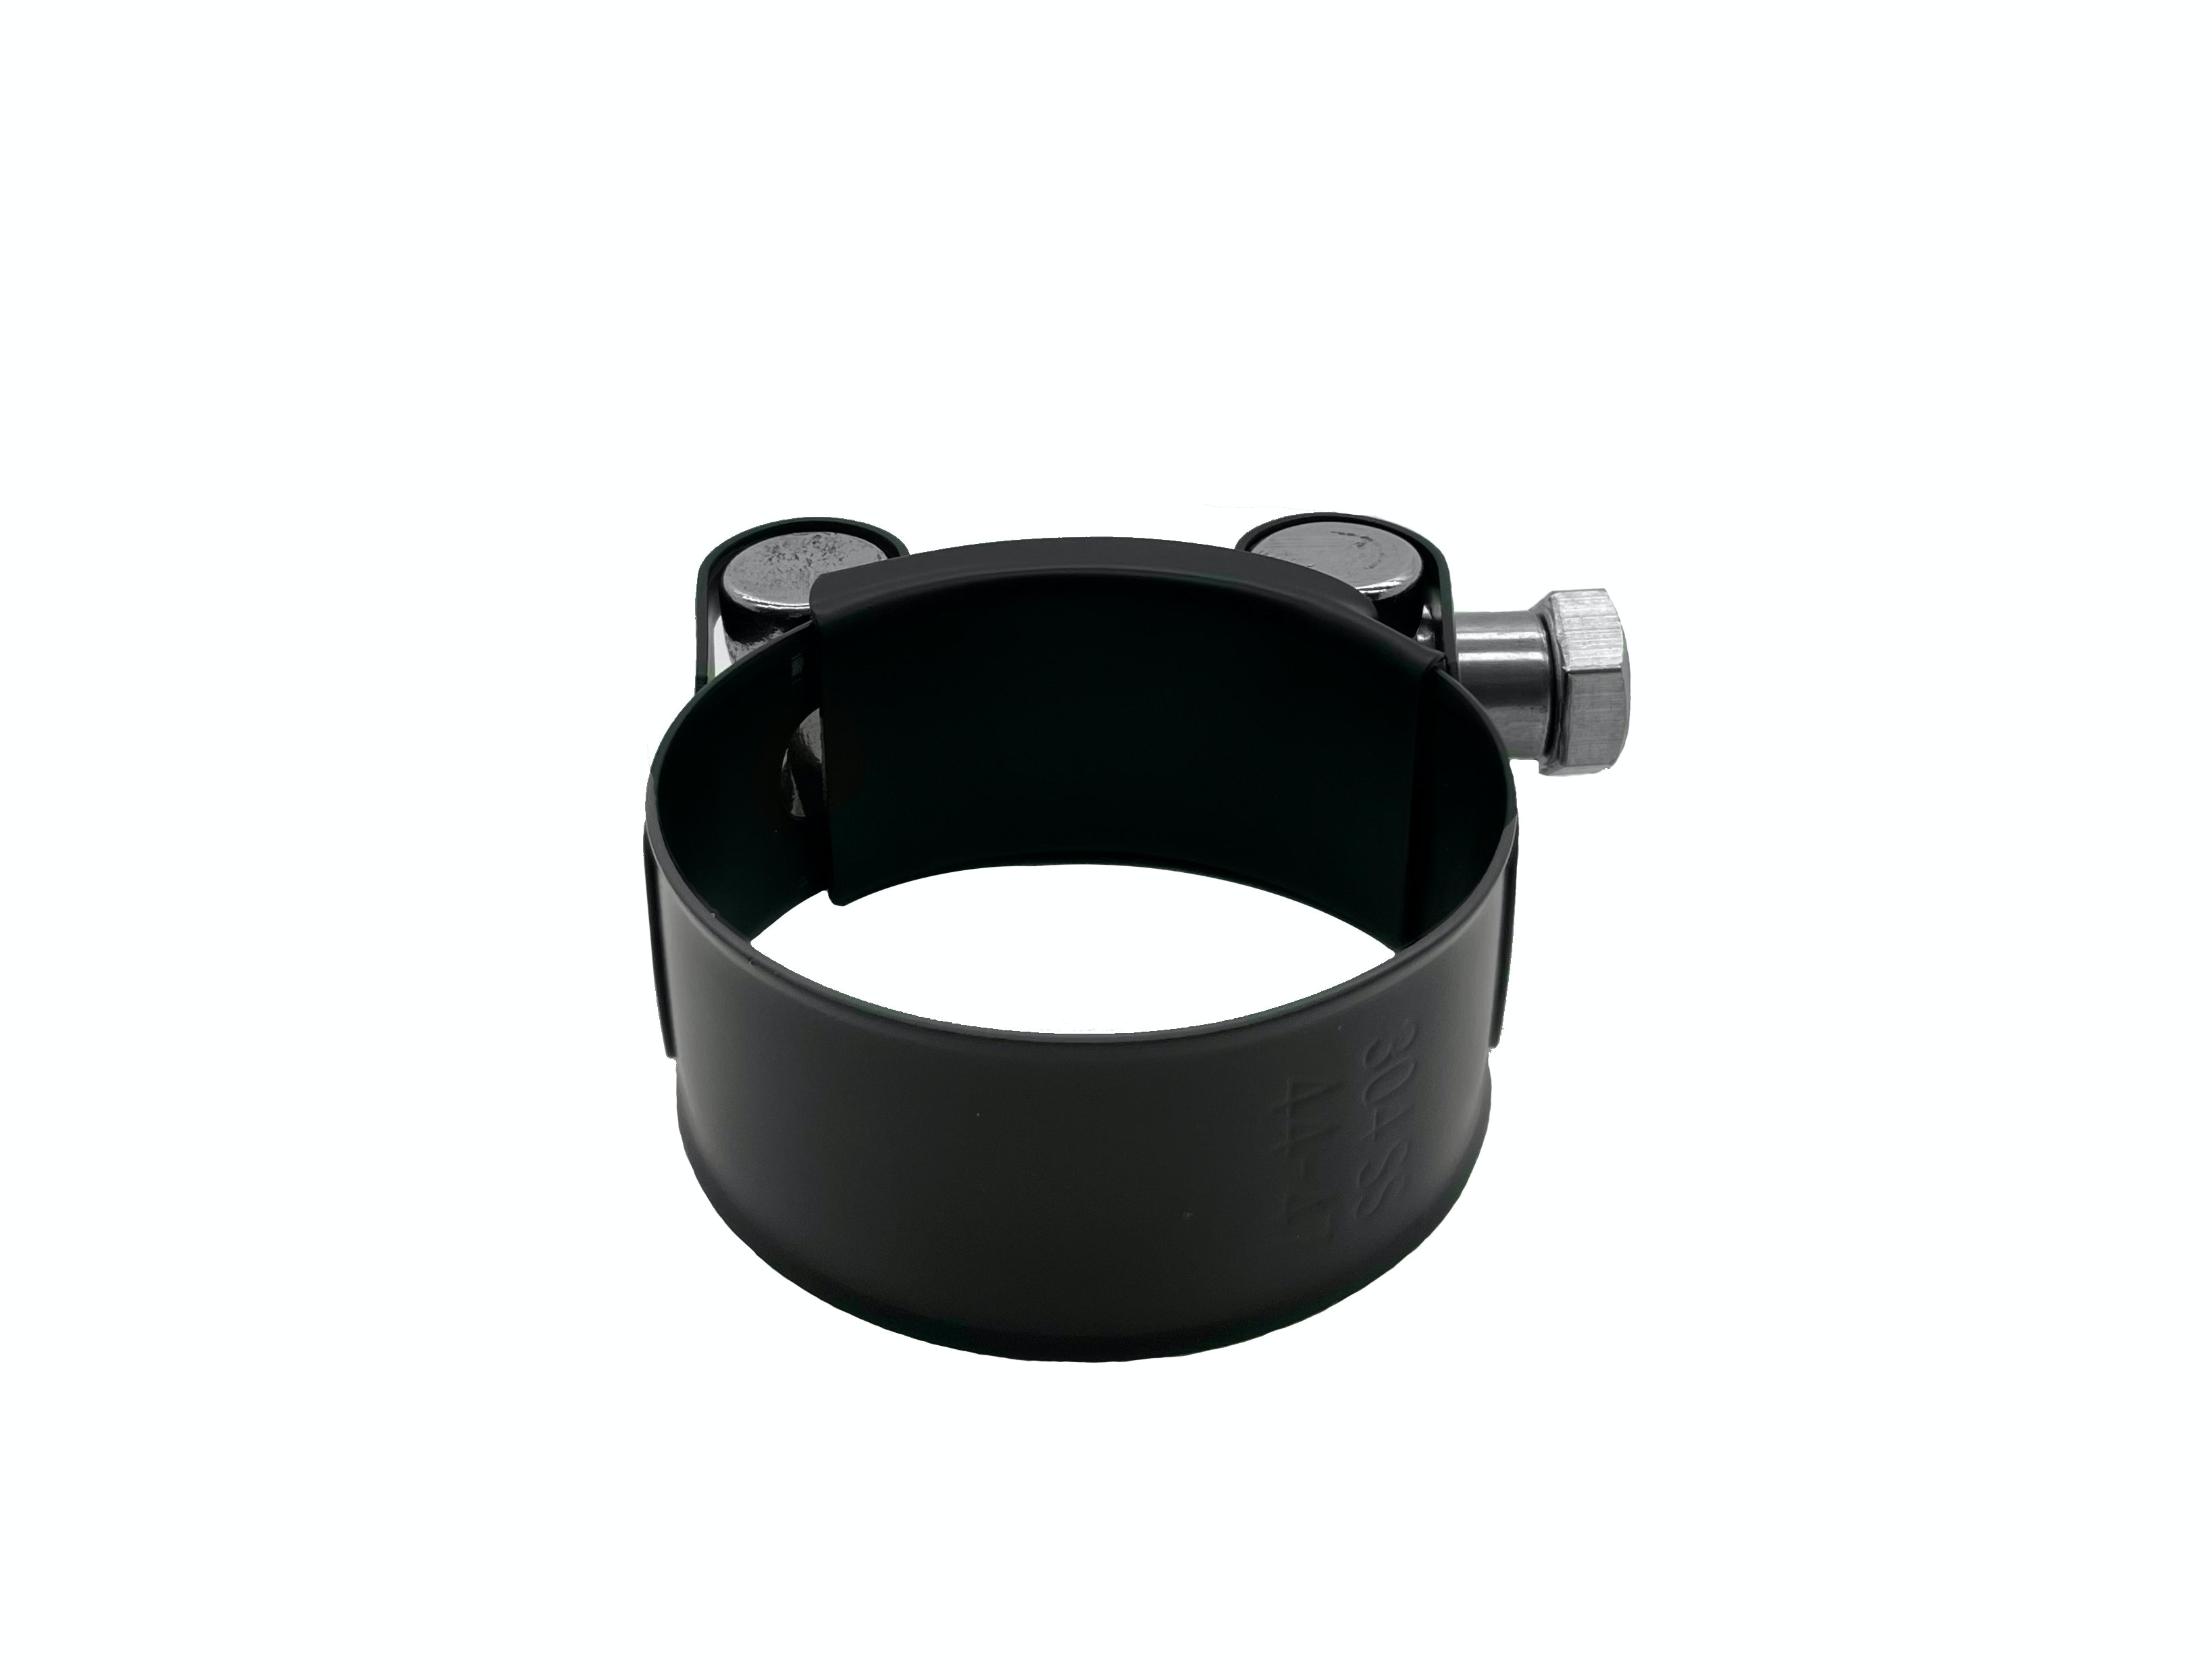 Coffman's Black Barrel Clamp for Honda Rebel 1100 (Fits some others)